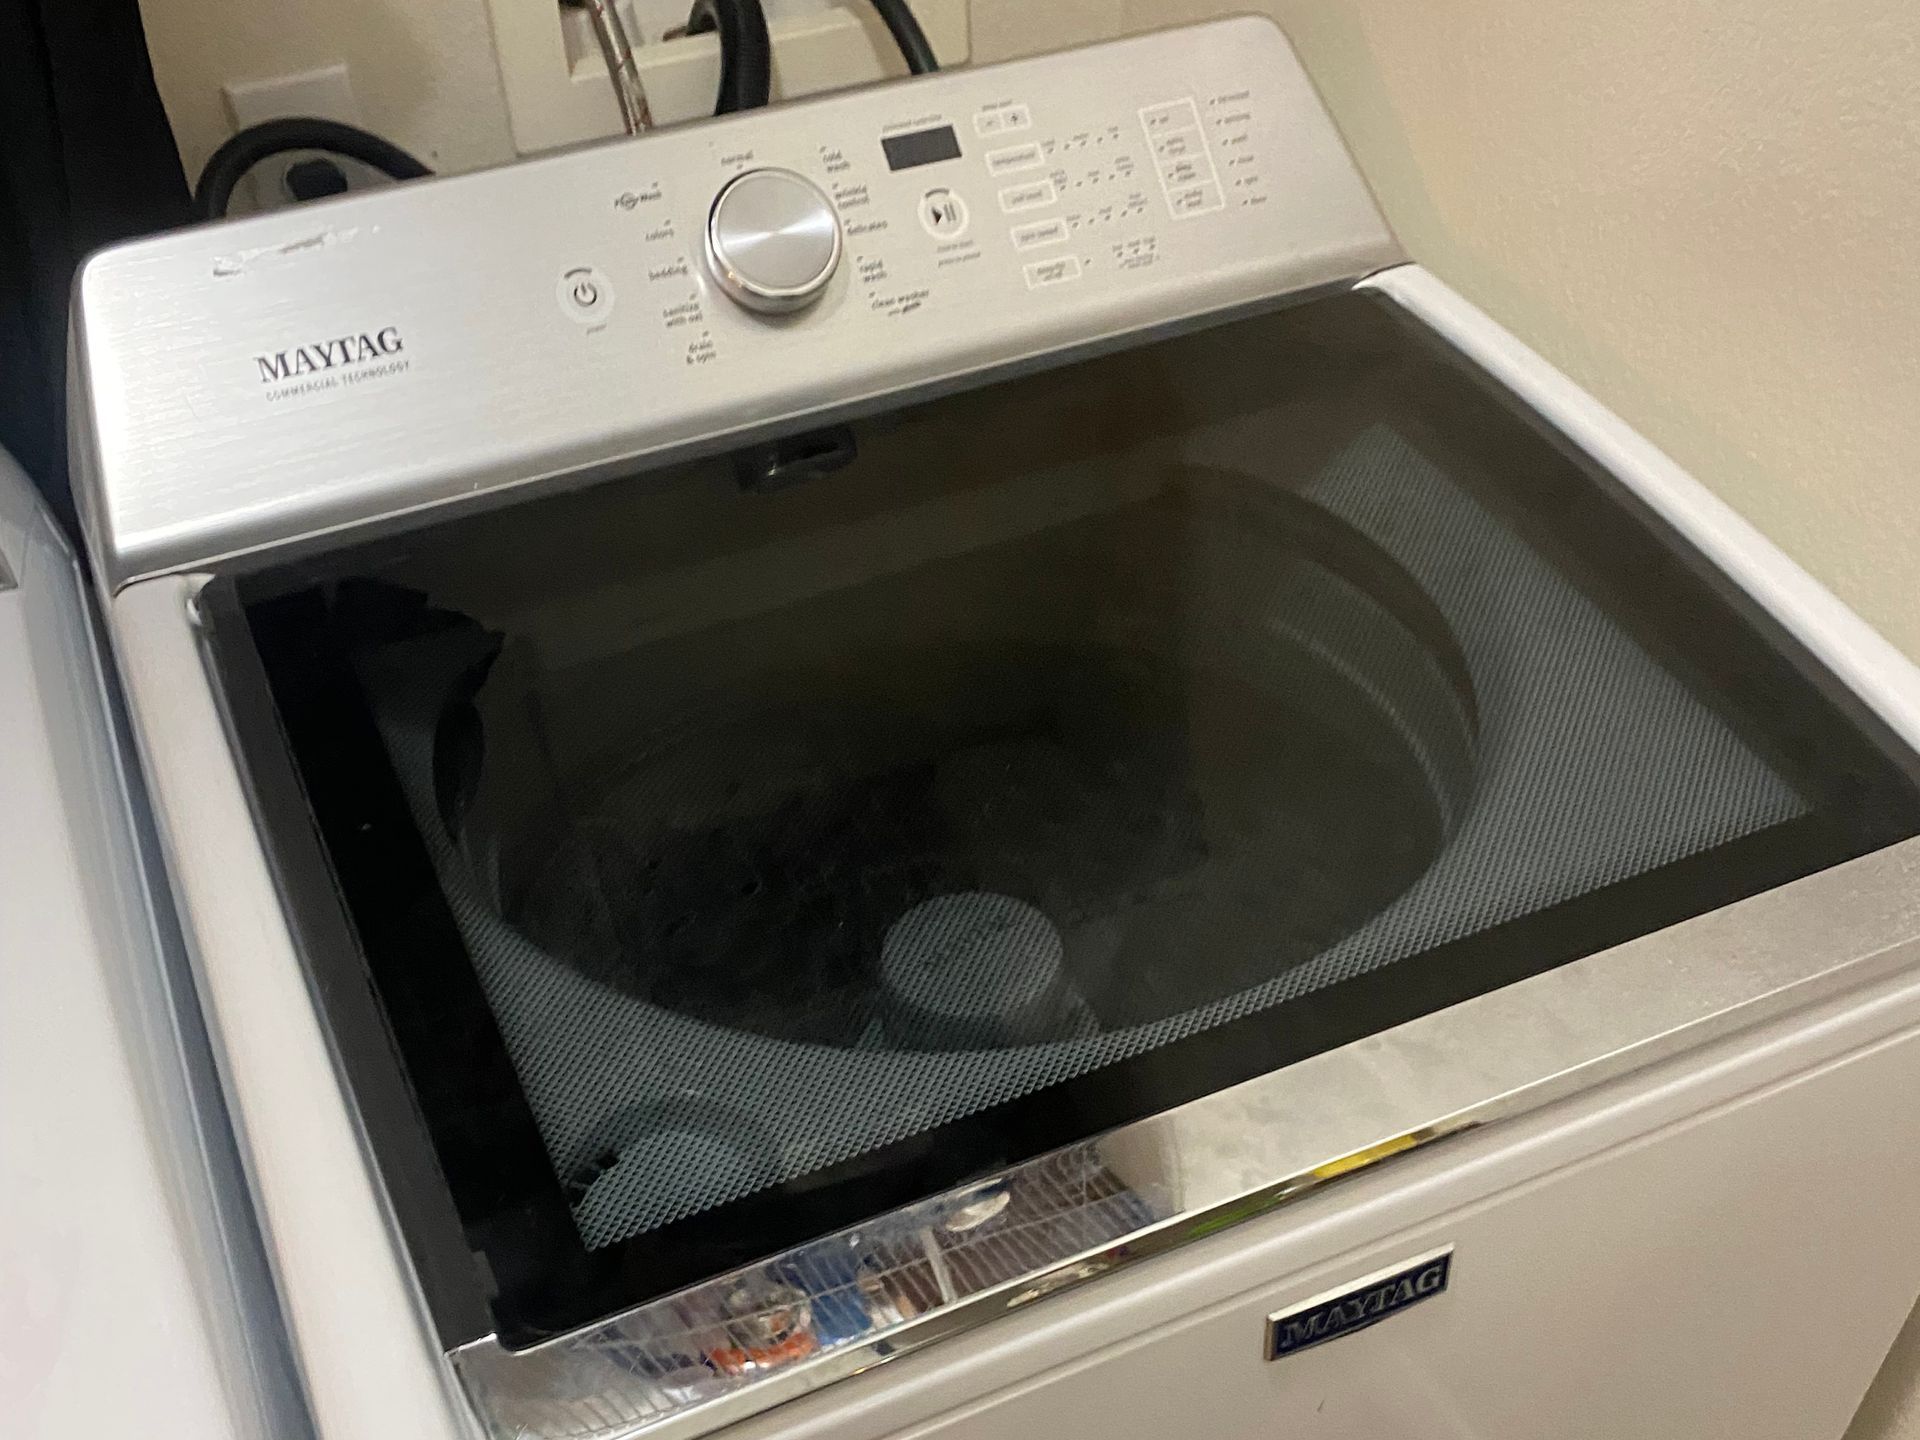 Maytag washer repair by Level Appliance Repair